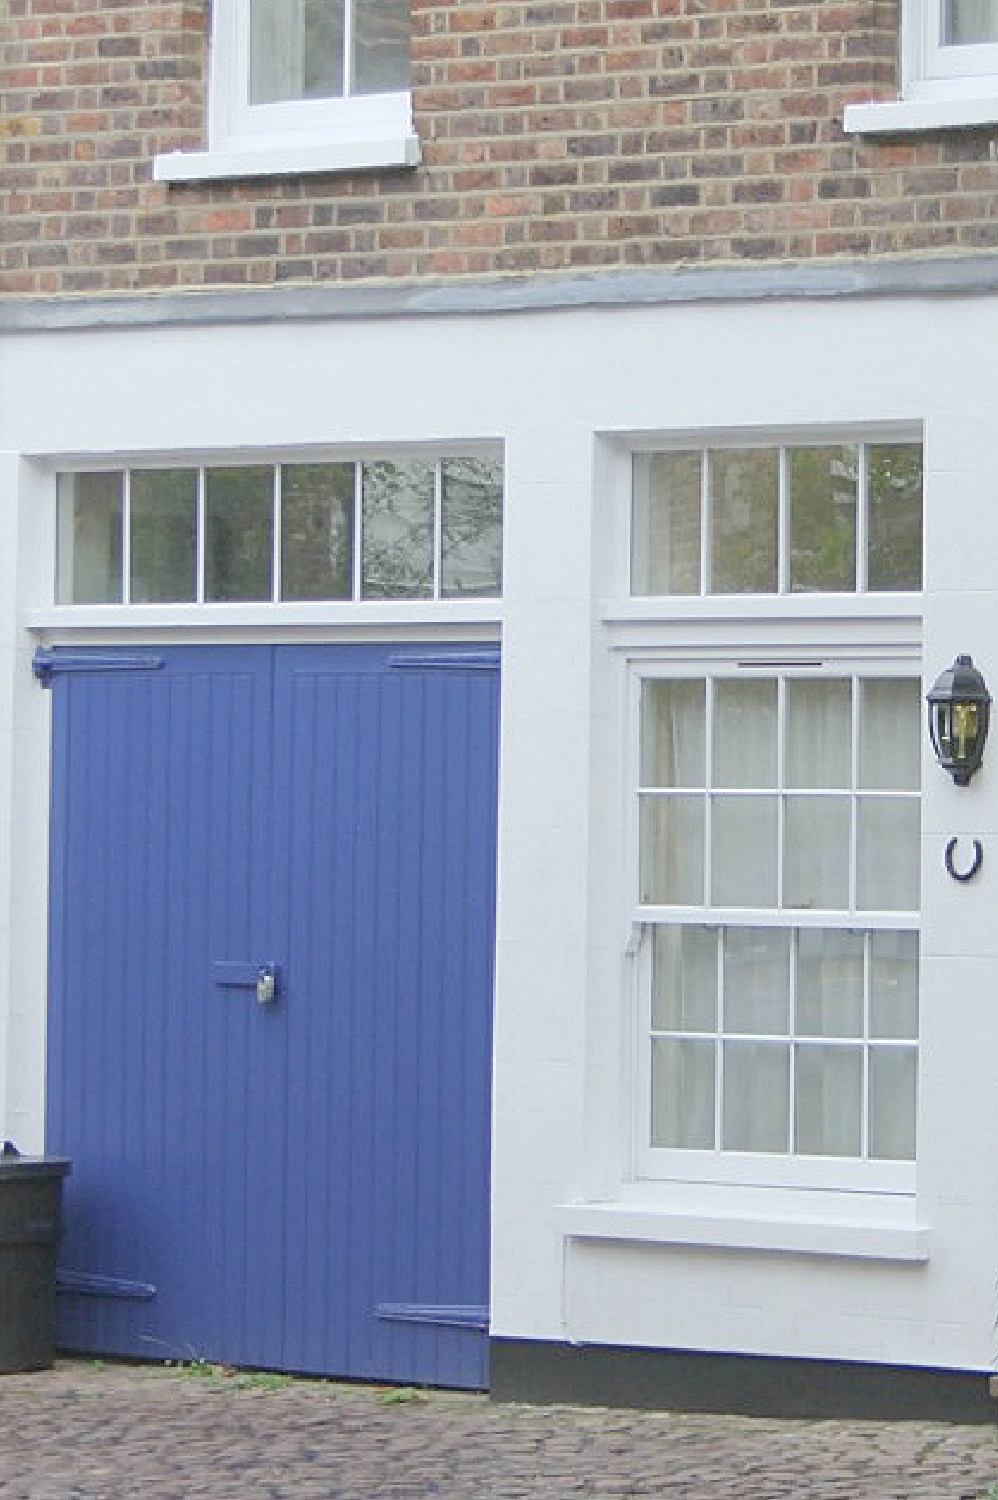 Bright blue stable doors on Mews entrance in Notting Hill. Come explore paint colors for your front door. #frontdoorcolors #paintcolors #curbappeal